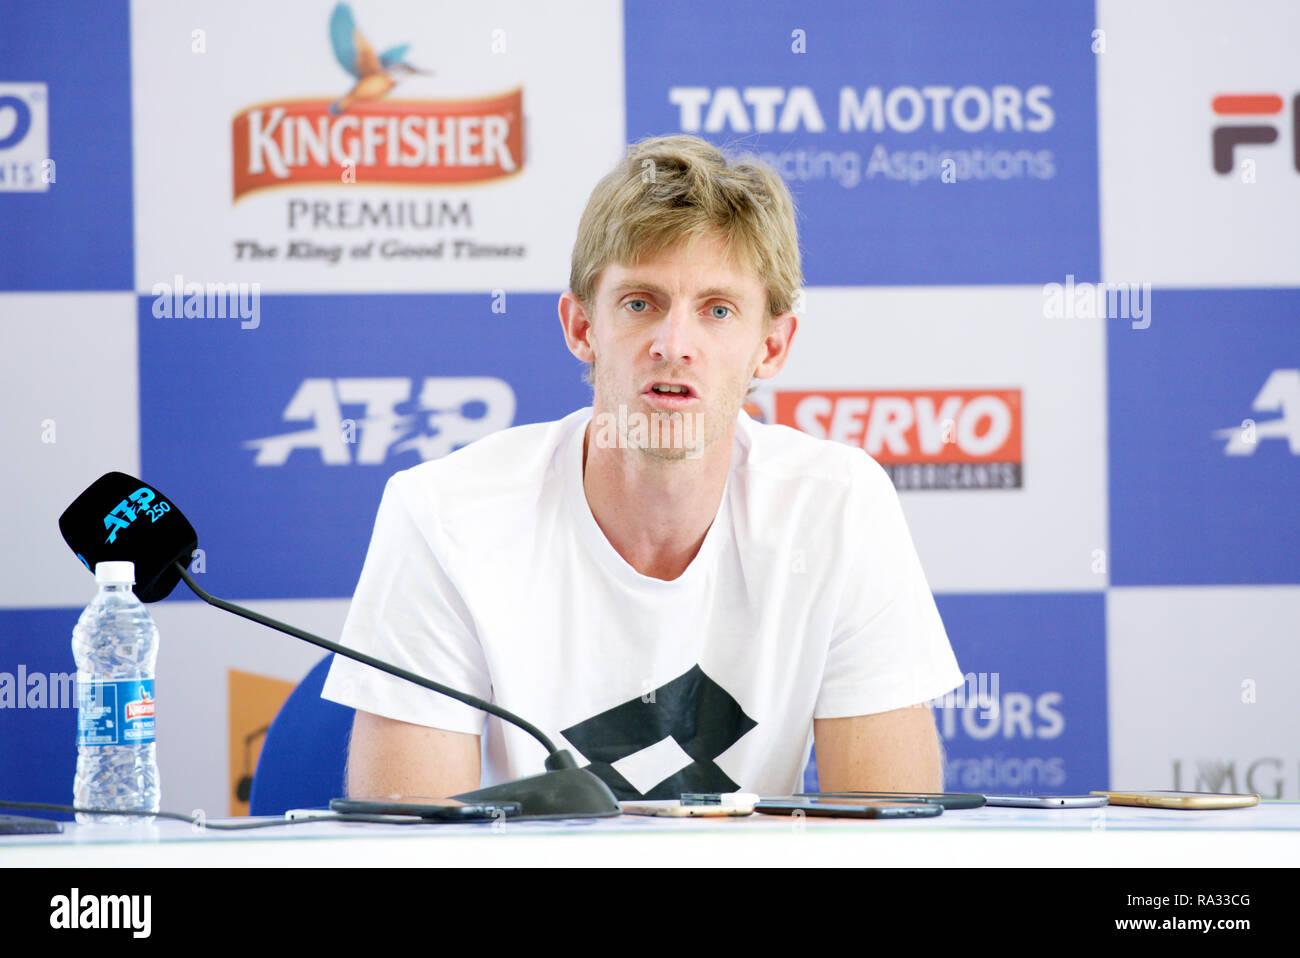 Pune, India. 31st December 2018. Kevin Anderson of South Africa speaks to the press on the inaugural day of Tata Open Maharashtra ATP Tennis tournament in Pune, India. Credit: Karunesh Johri/Alamy Live News Stock Photo